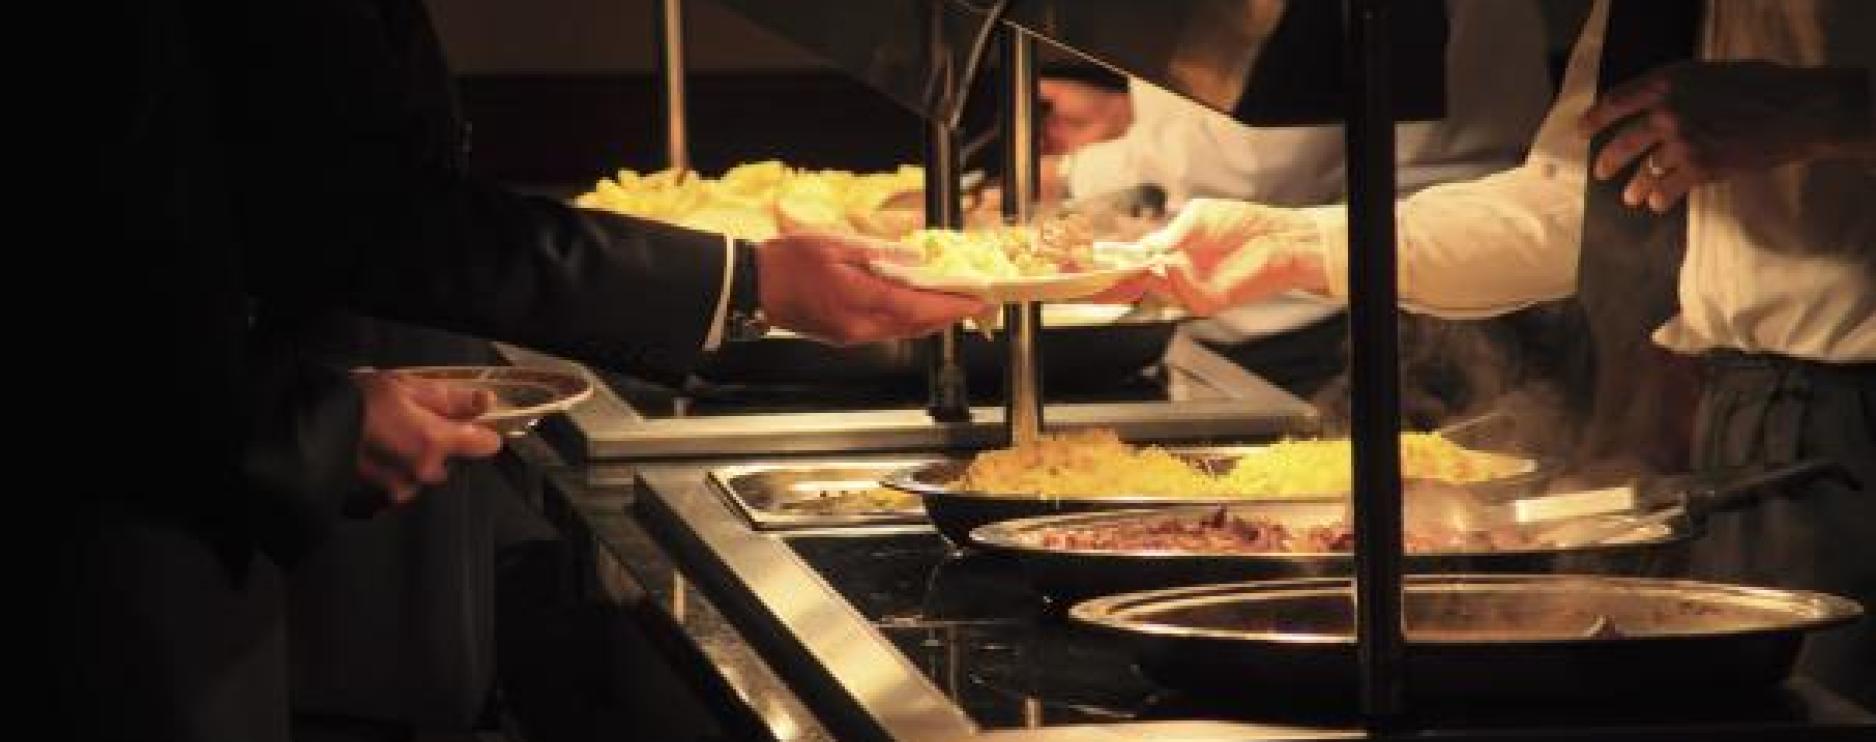 Cheshire East Council to stop school lunch service due to rising costs